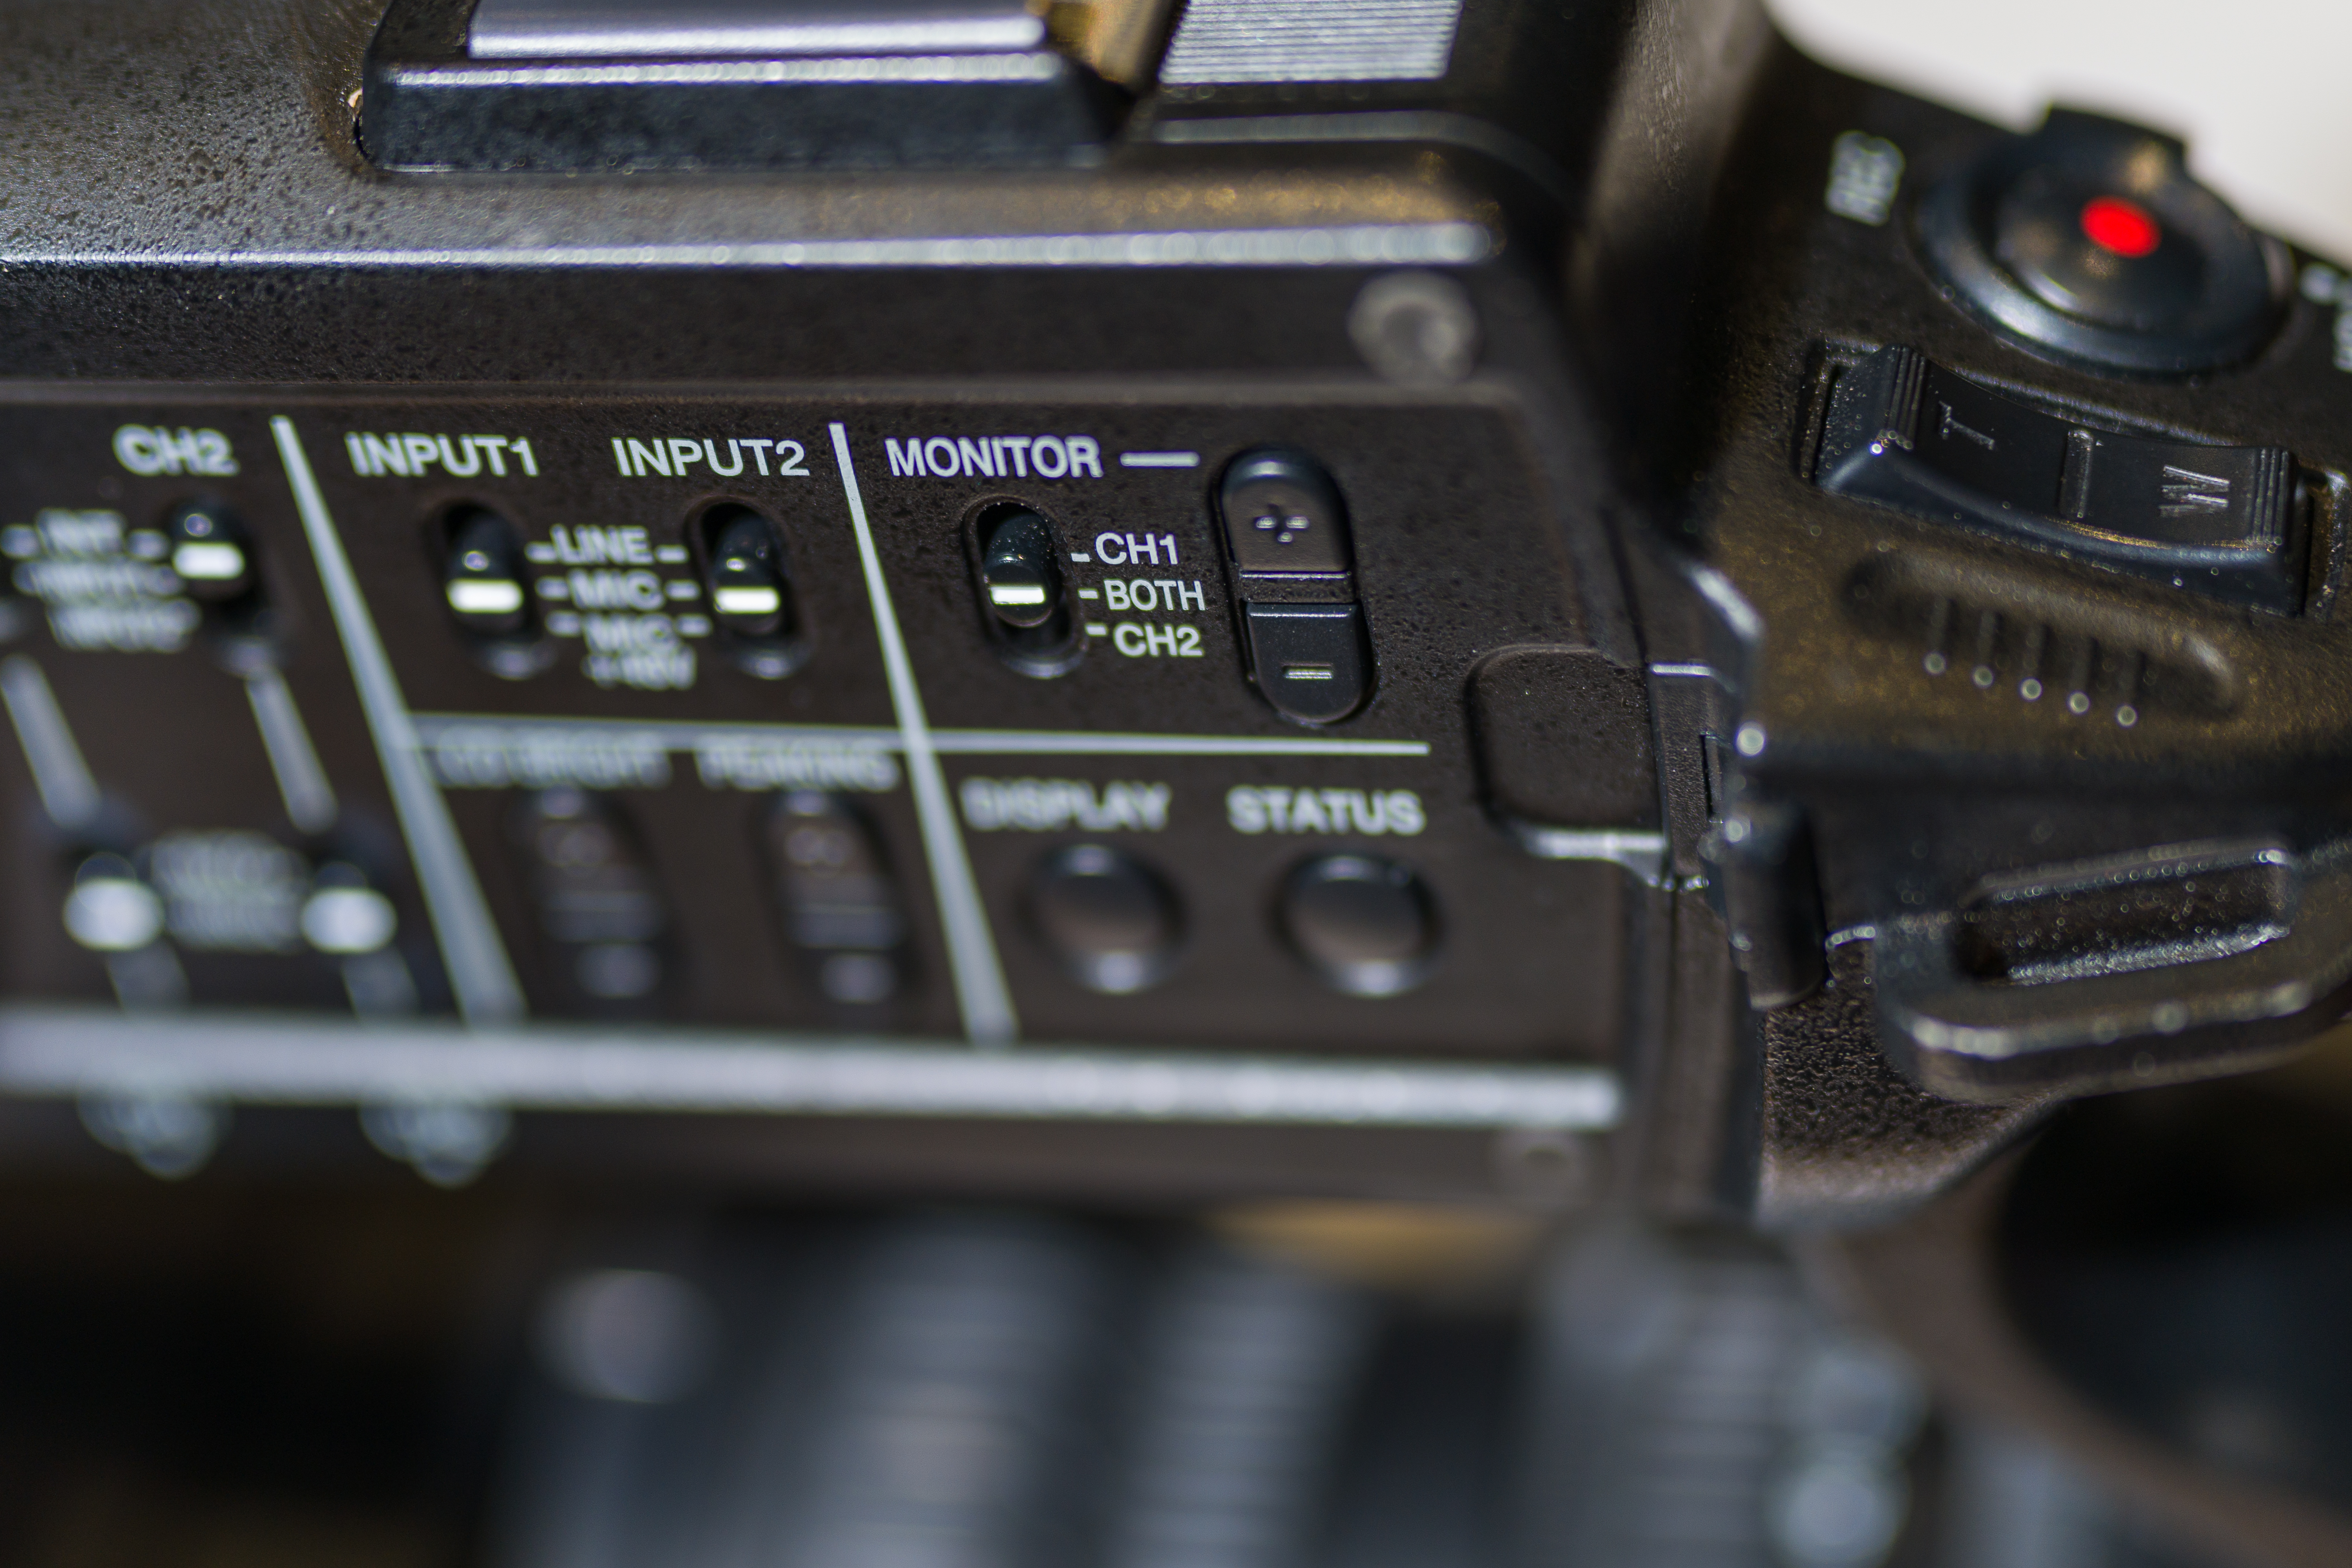 Audio headphone controls on a video camera. There are volume buttons and a switch for channel 1, channel 2, or both.